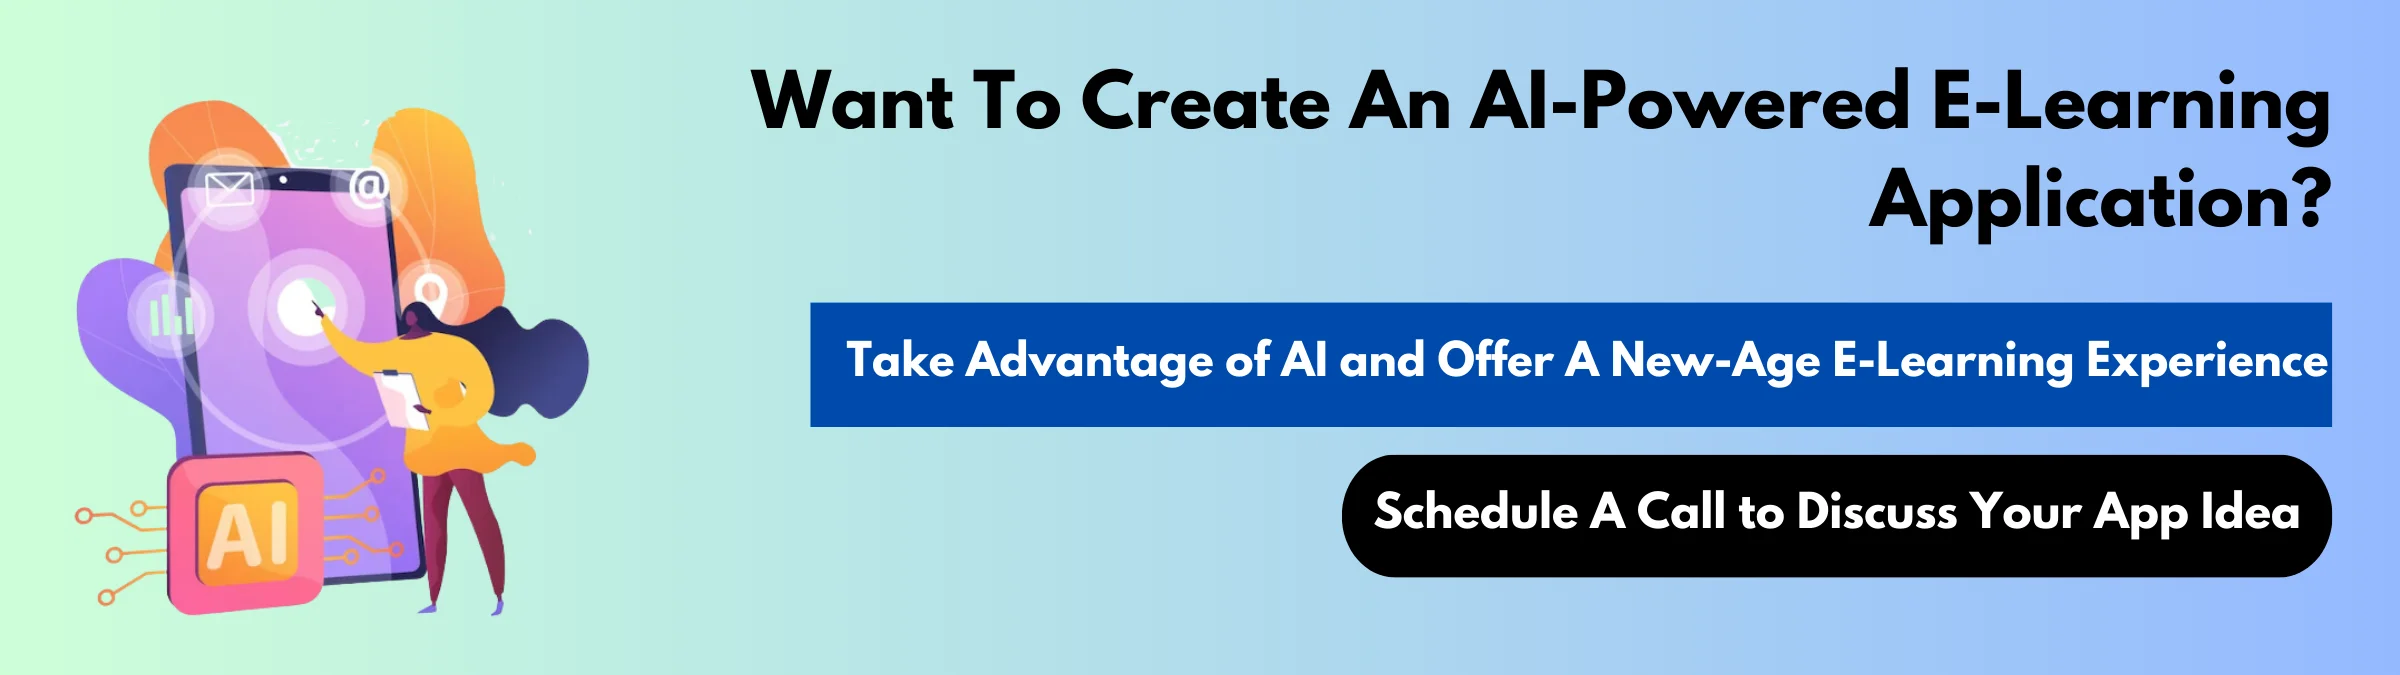 ai powered elearning applications